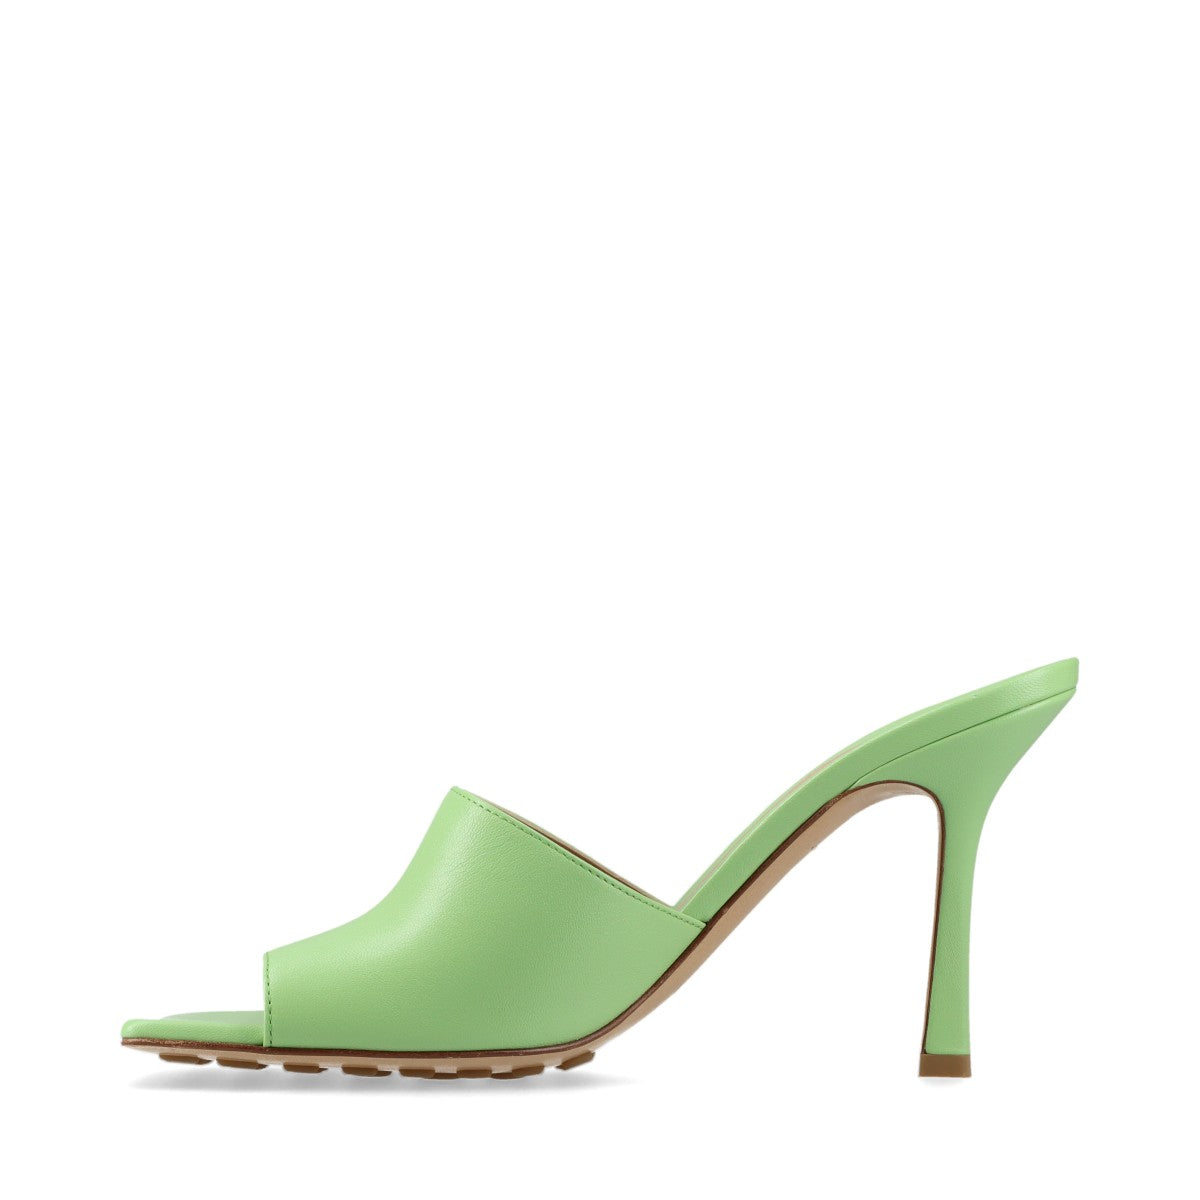 Bottega Veneta Leather Sandals 39 Ladies' light green replacement lift There is a storage bag stretching